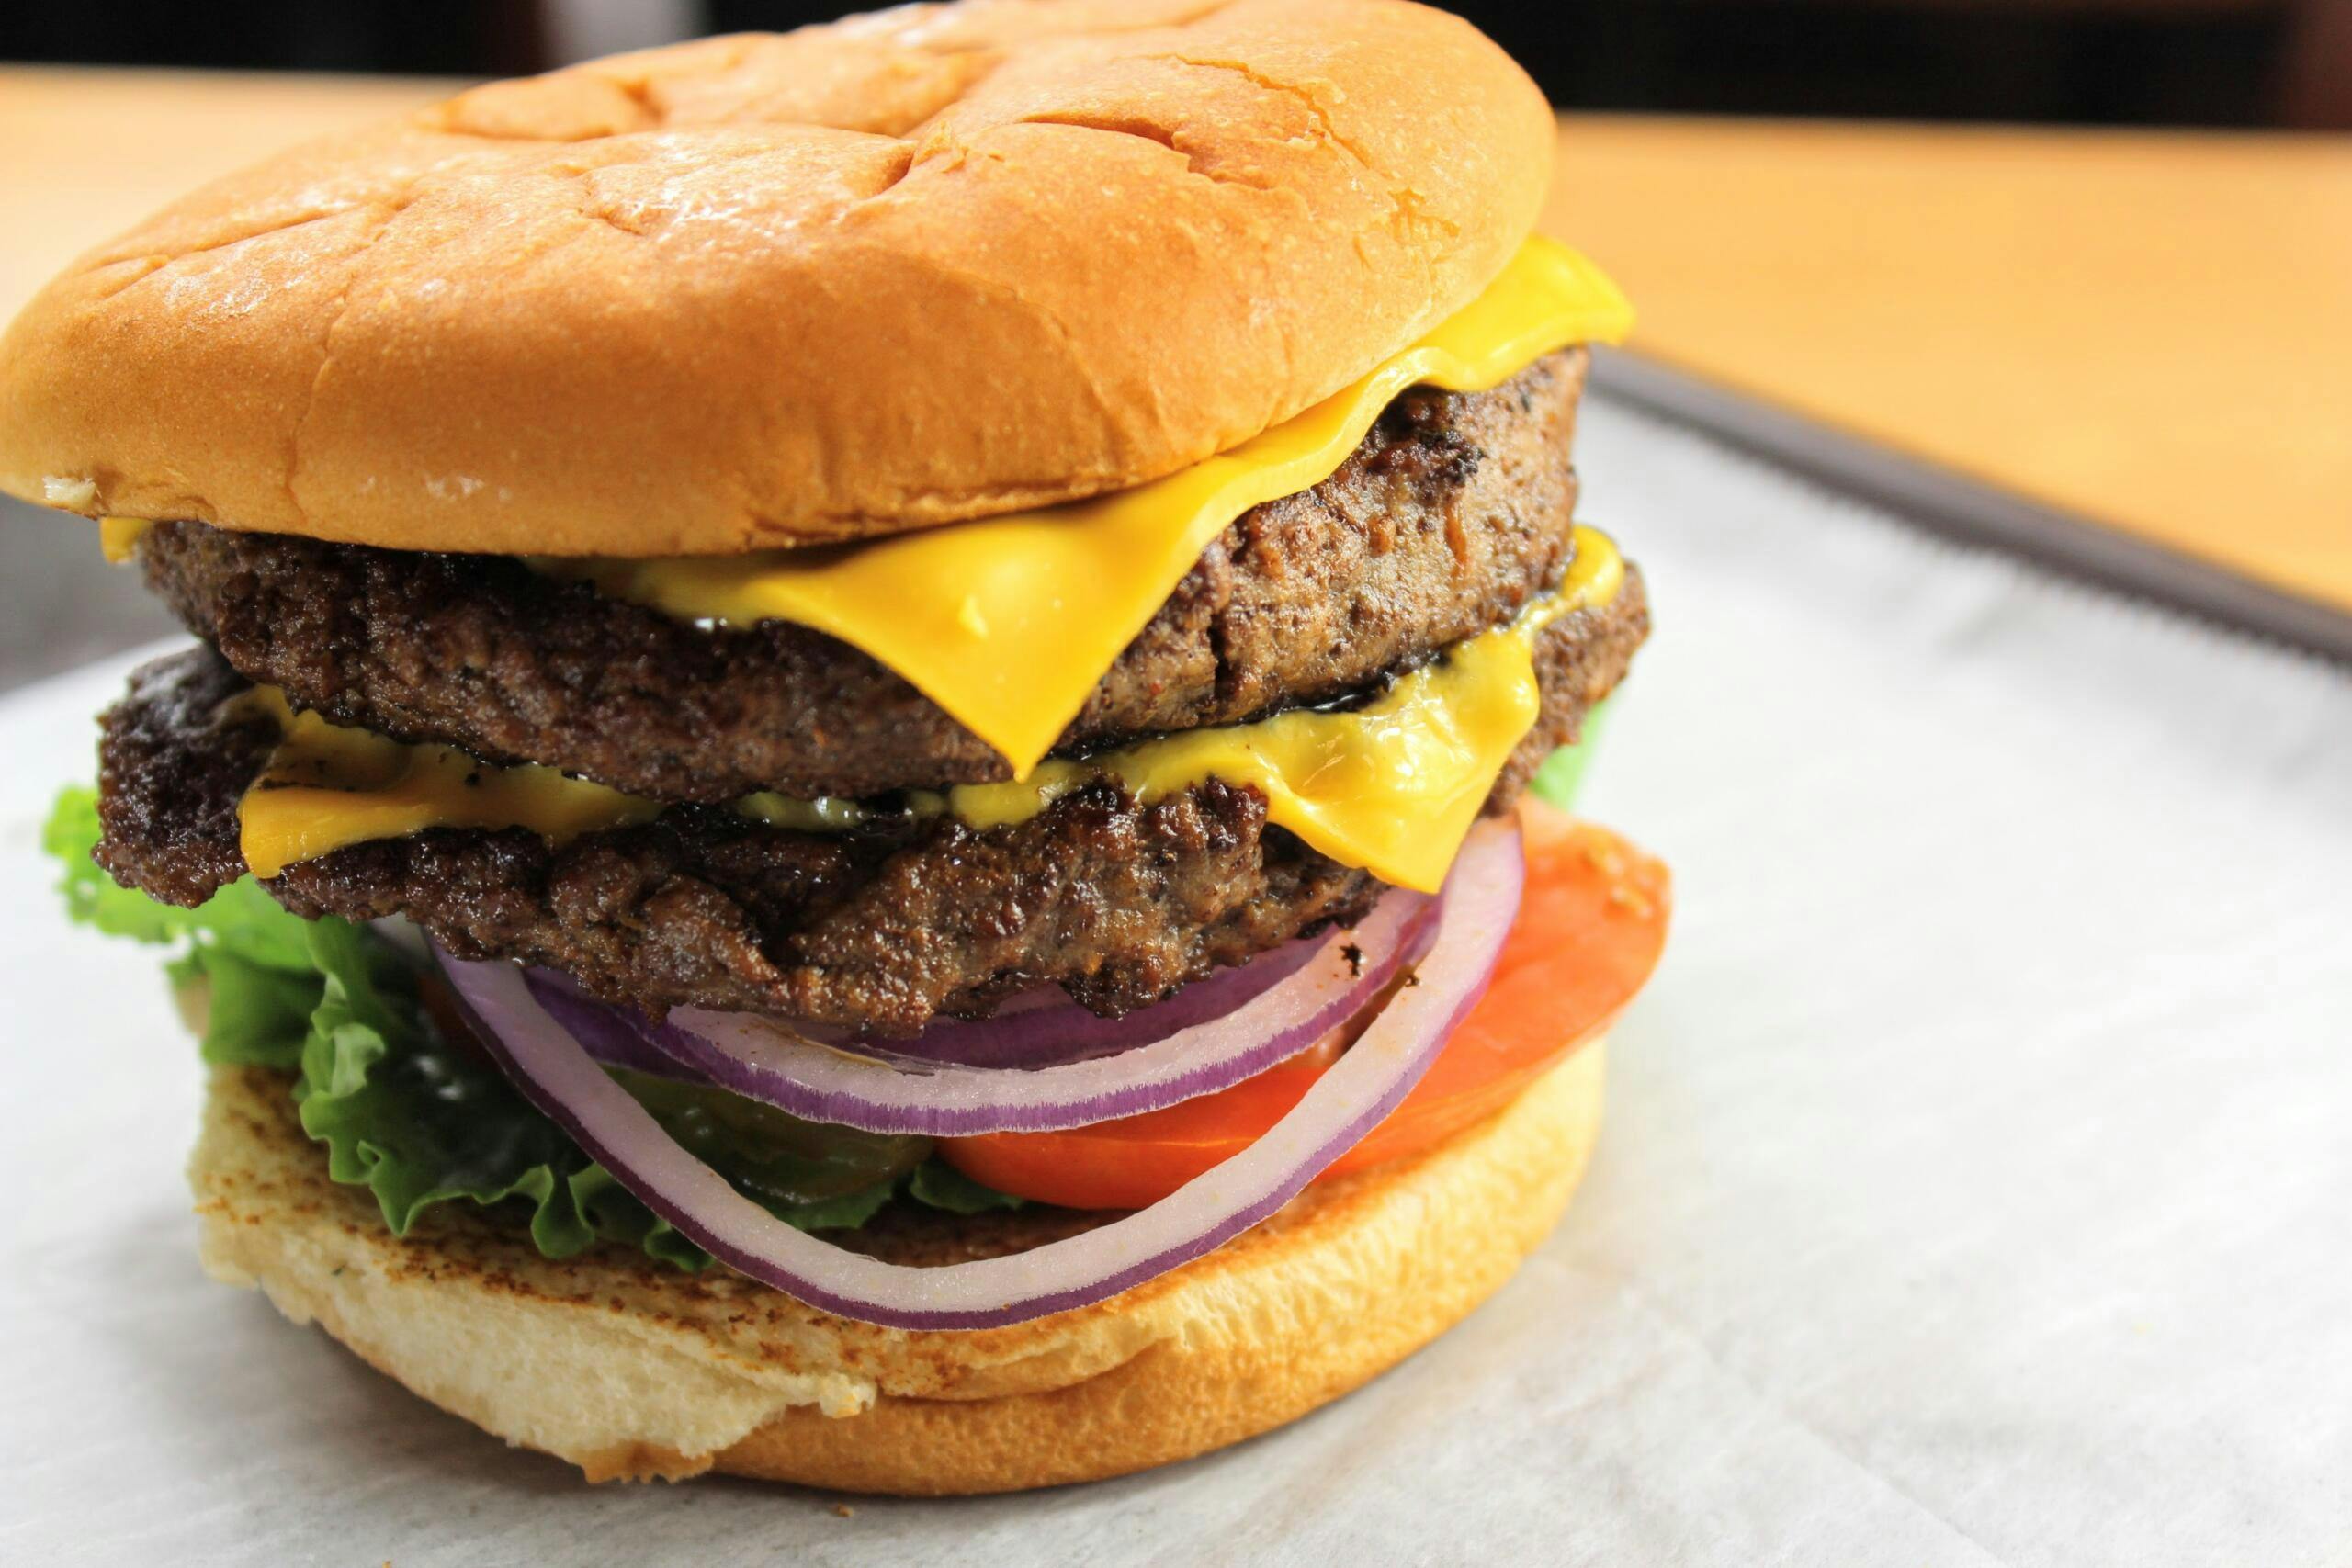 San Antonio's Papa's Burgers shares new name after legal scuffle